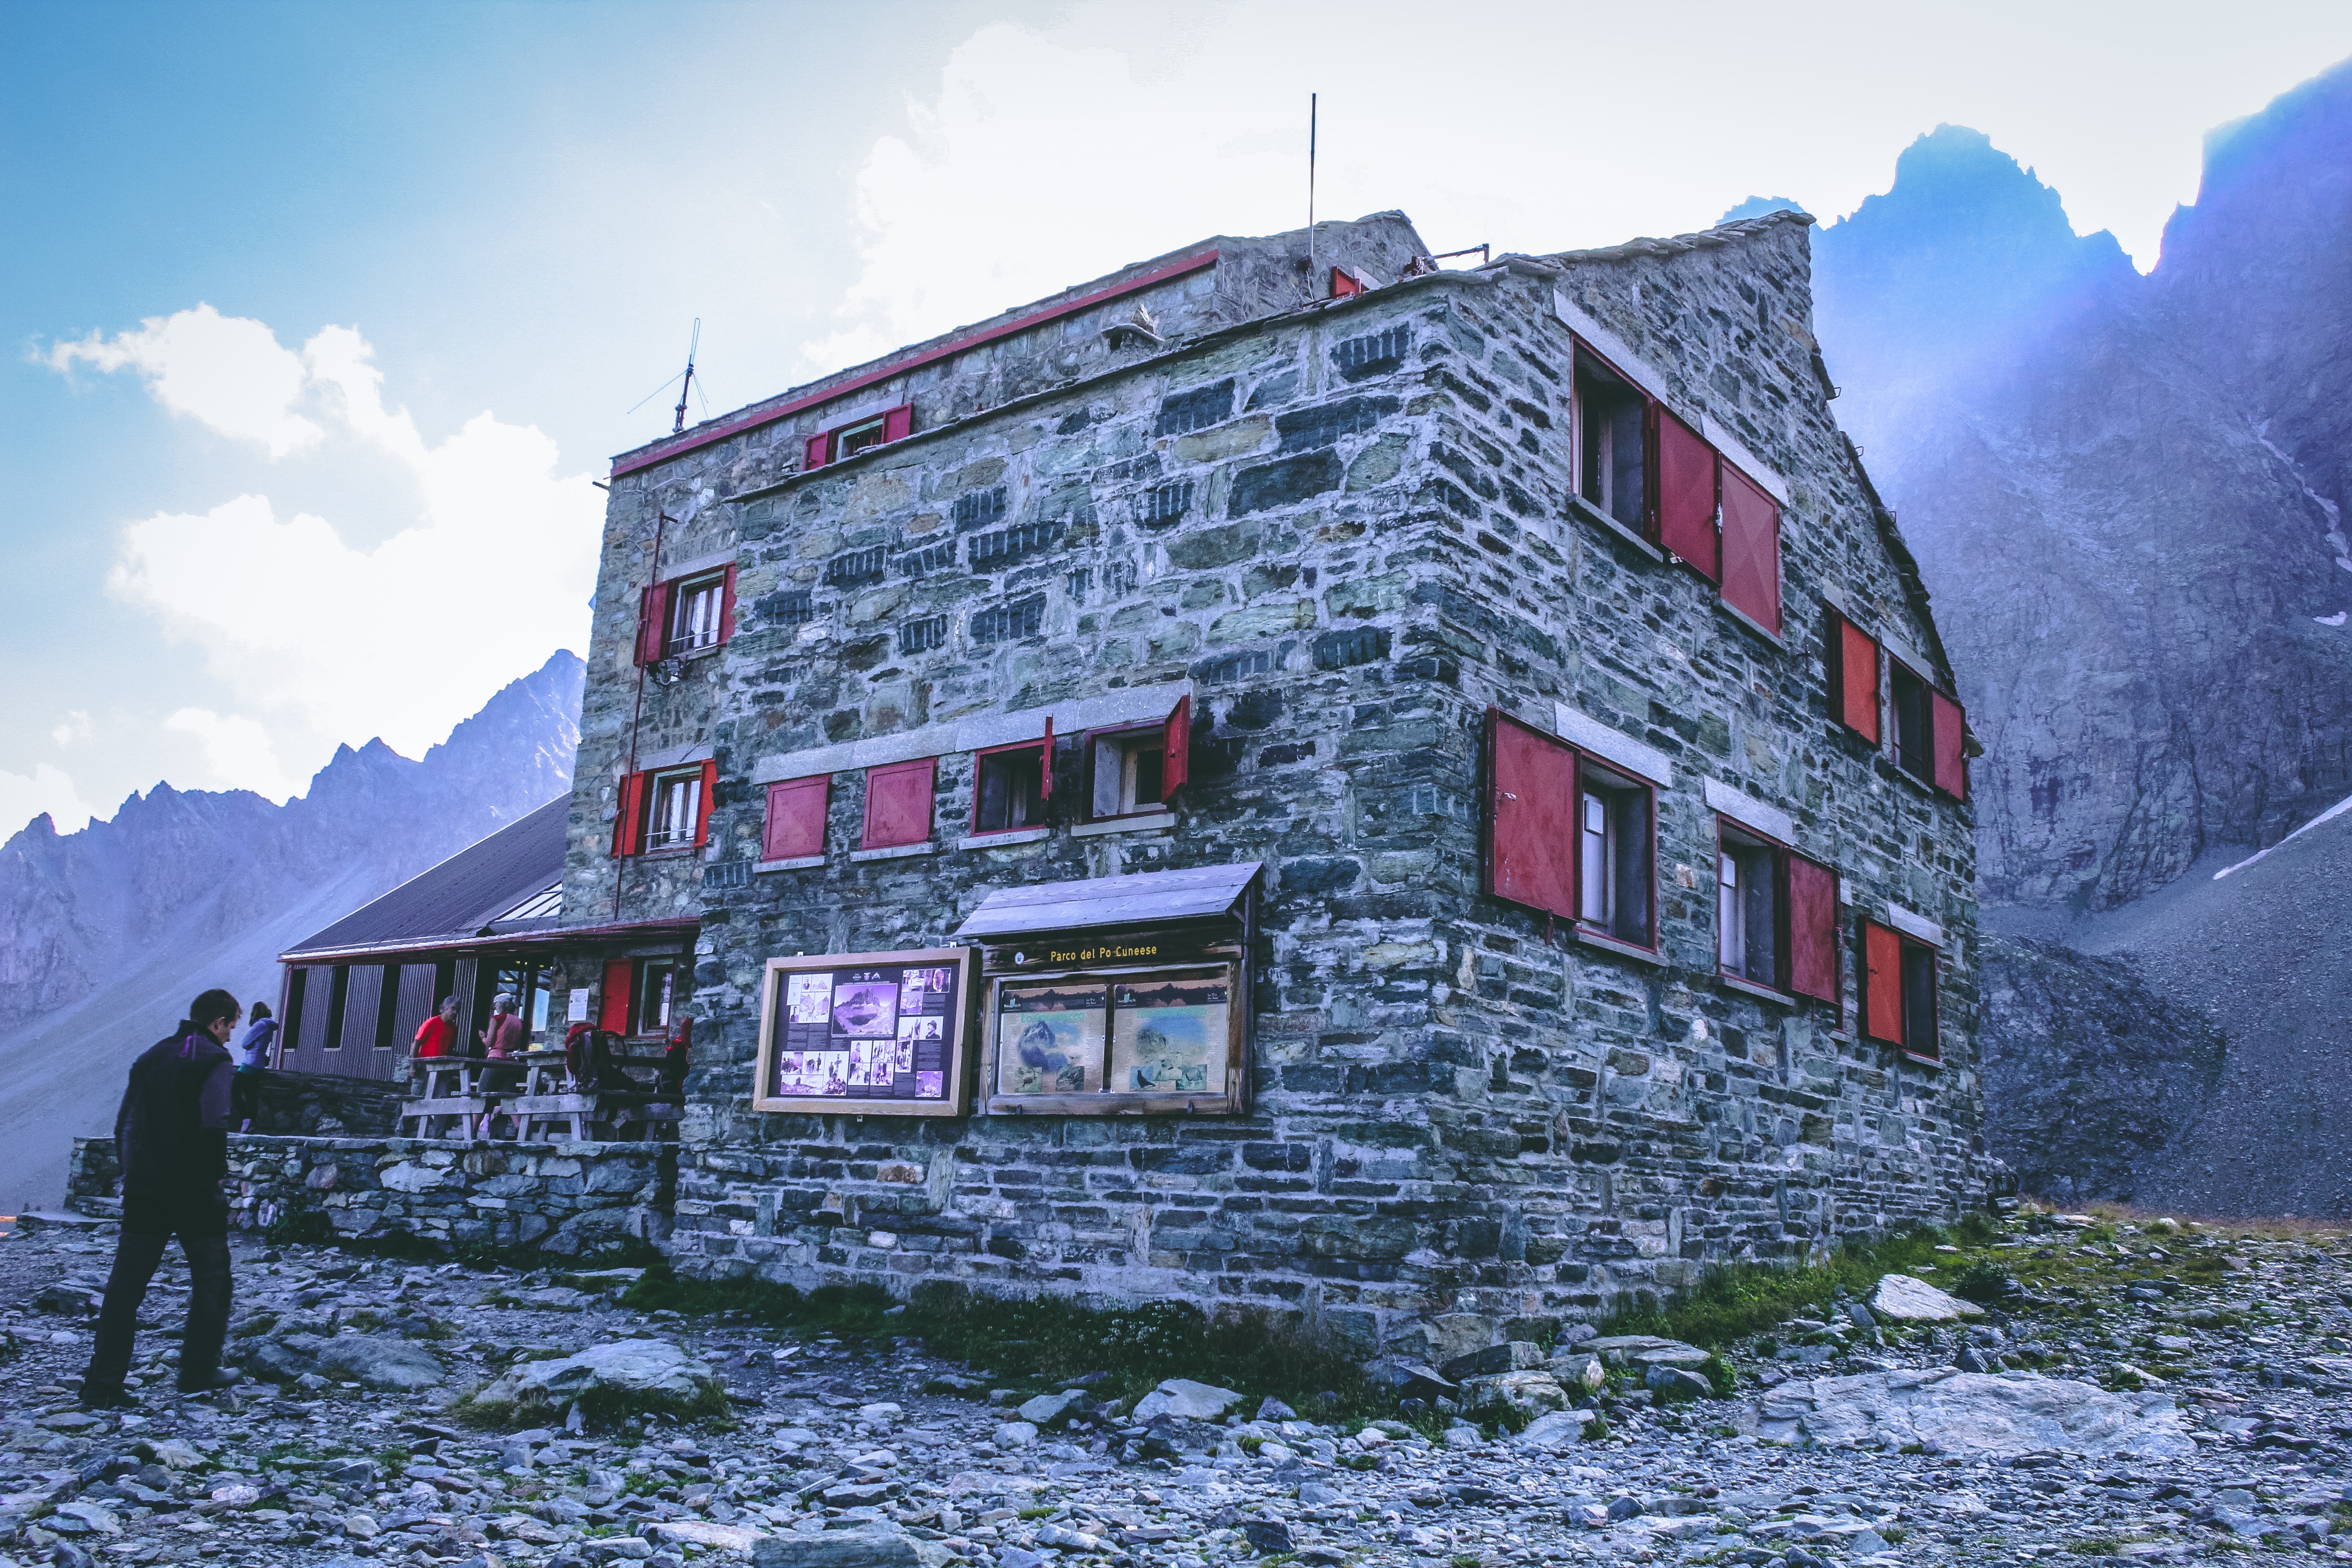 Photography of Concrete Building Near Mountains